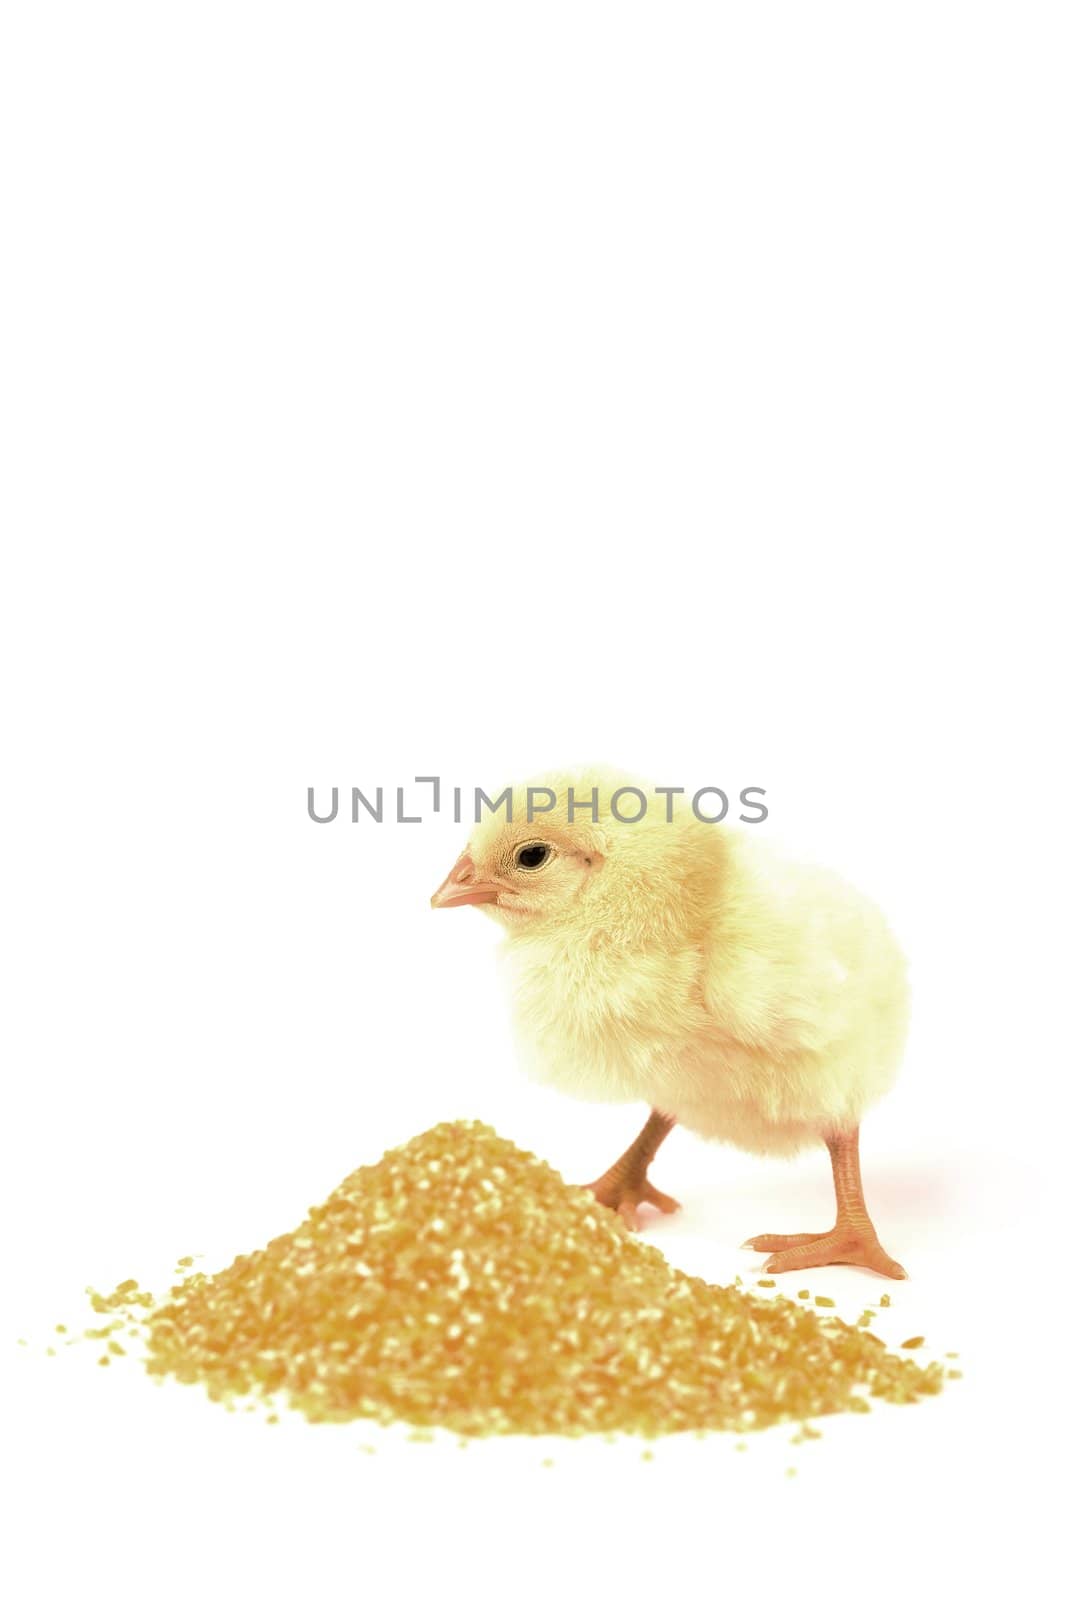 A cute and small baby chicken, isolated on a white background next to food.